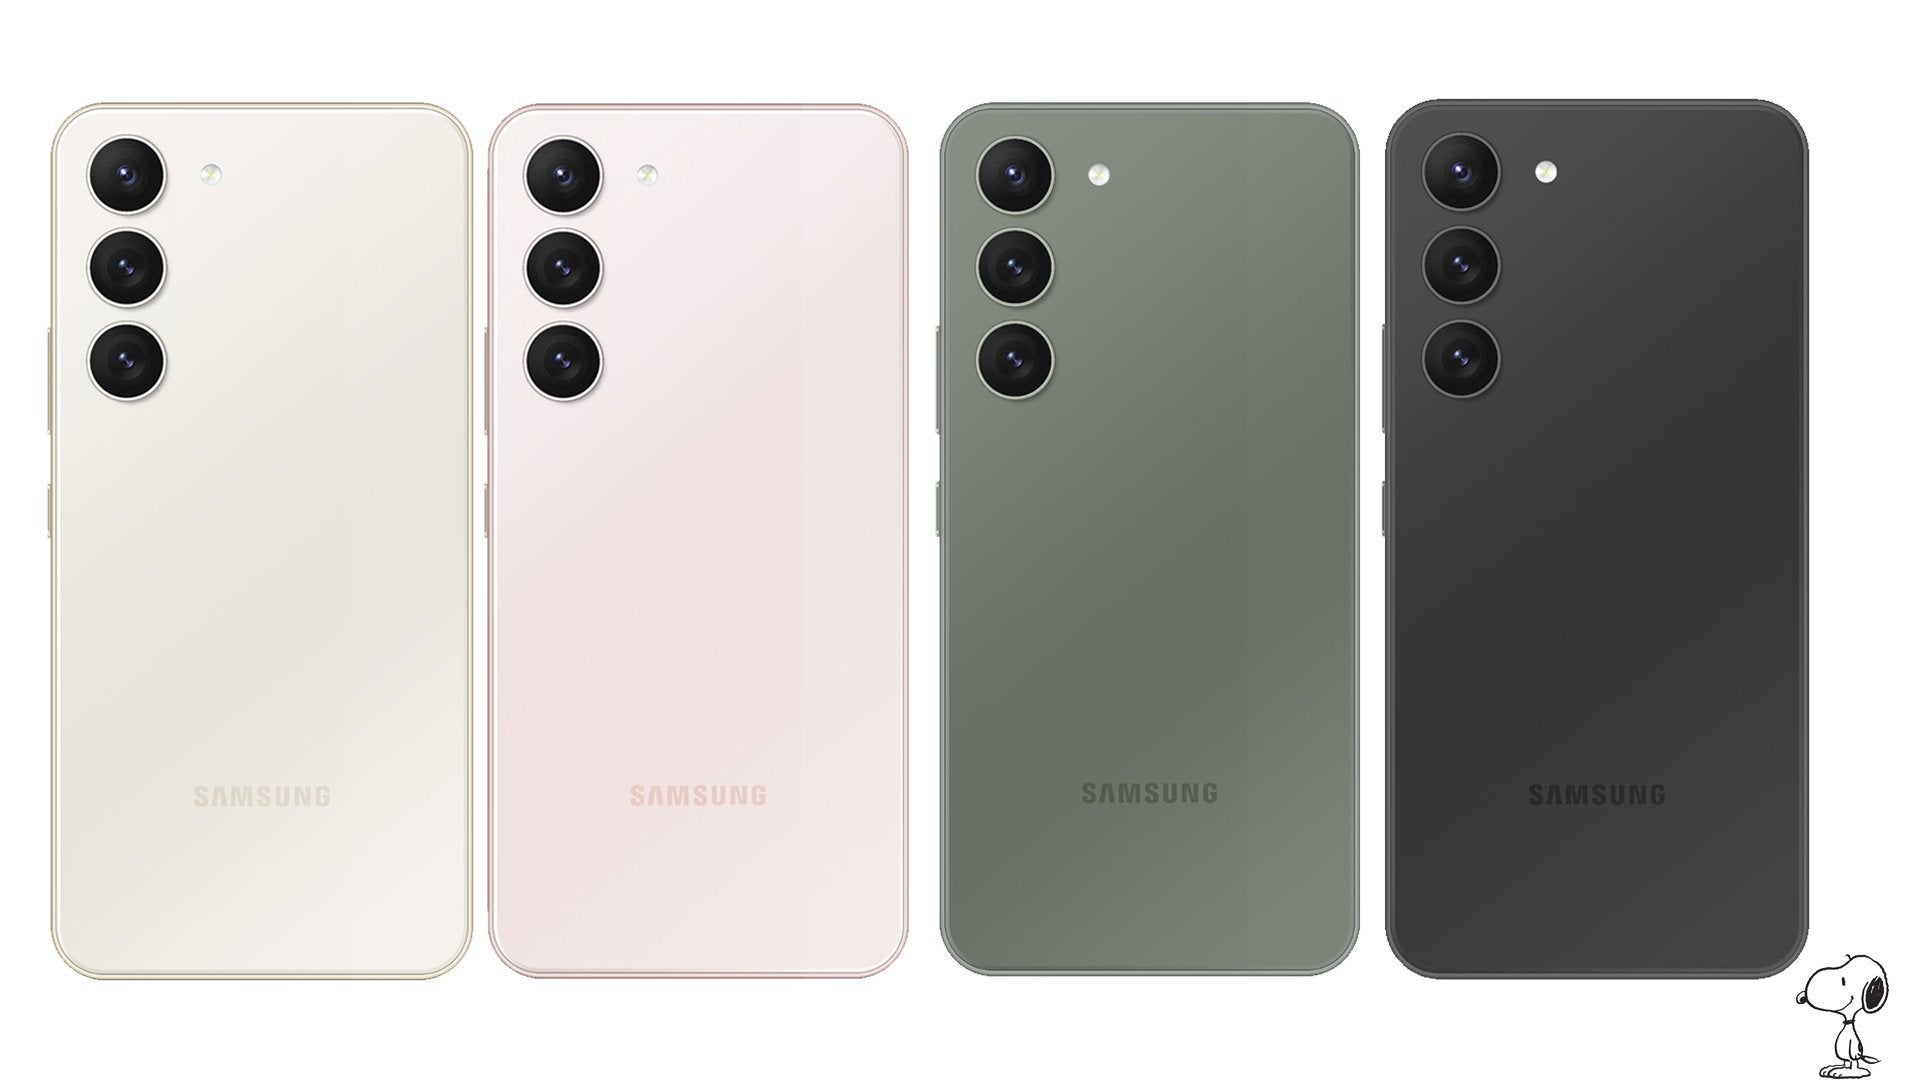 Galaxy S23 colors Cotton Flower, Misty Lilac, Botanic Green, and Phantom Black - New images show all the color options for the Galaxy S23 range